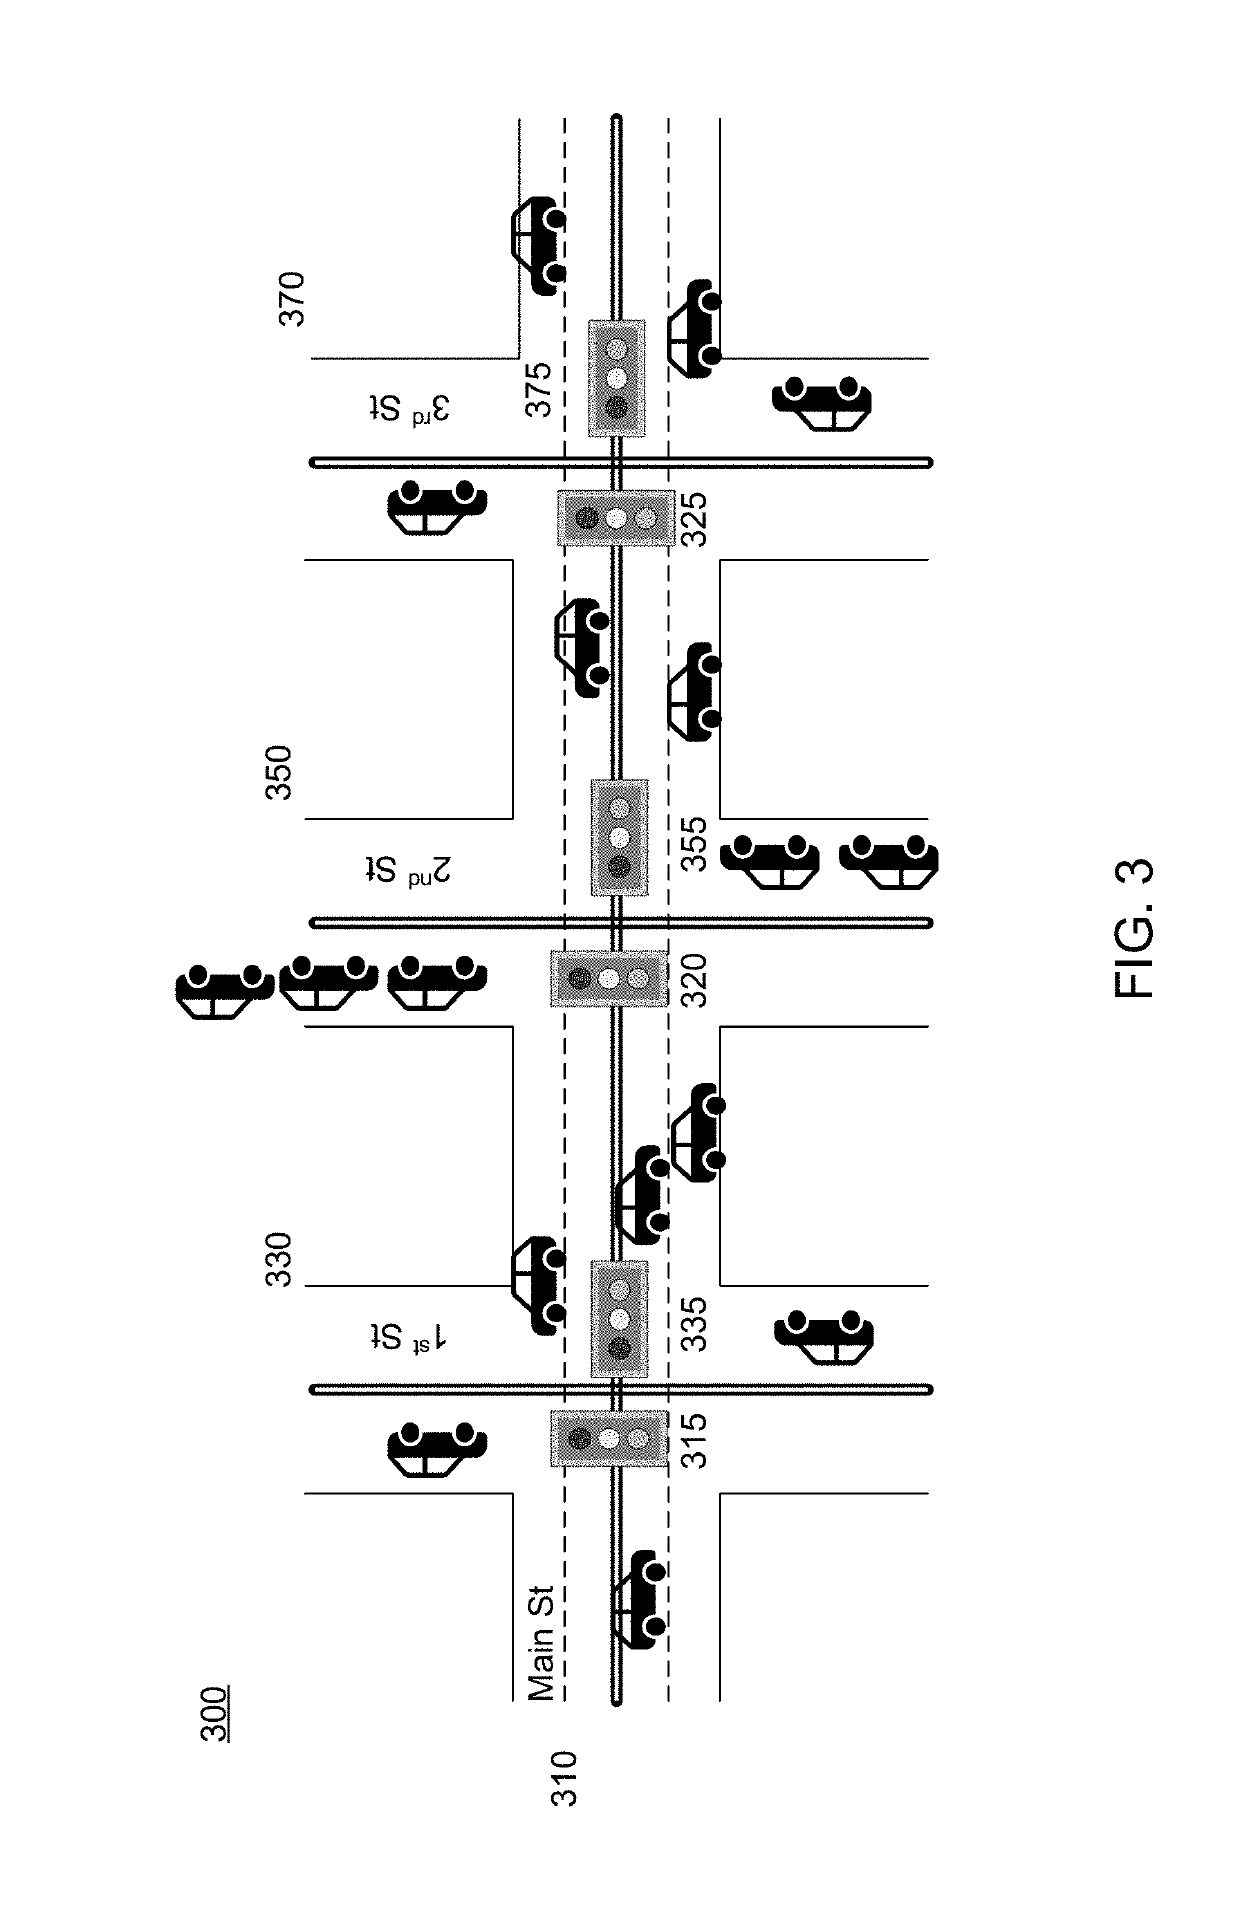 System and Apparatus for Wireless Control and Coordination of Traffic Lights